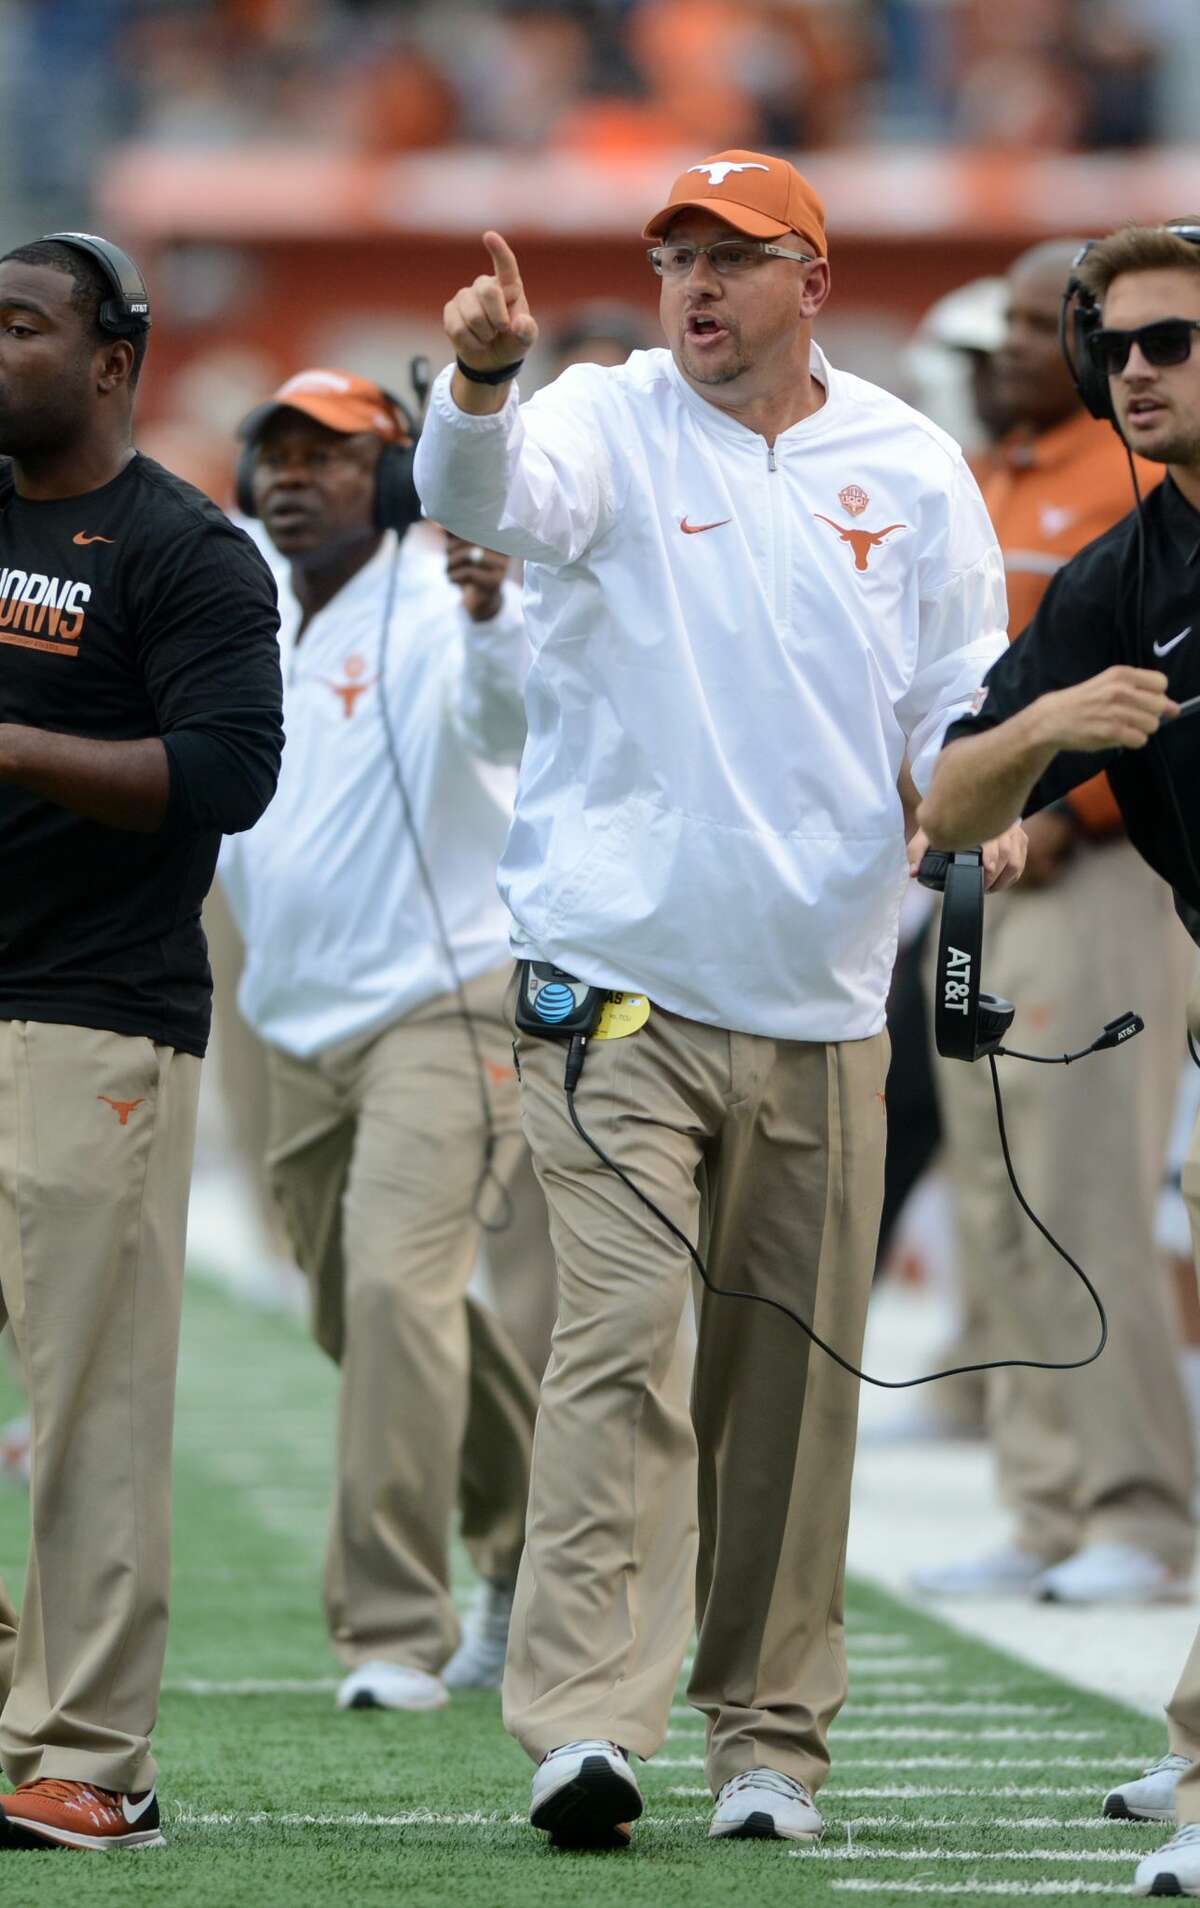 During his two-season stint working with the UT Longhorns, Traylor was named Big 12 Recruiter of the Year by Scout.com.